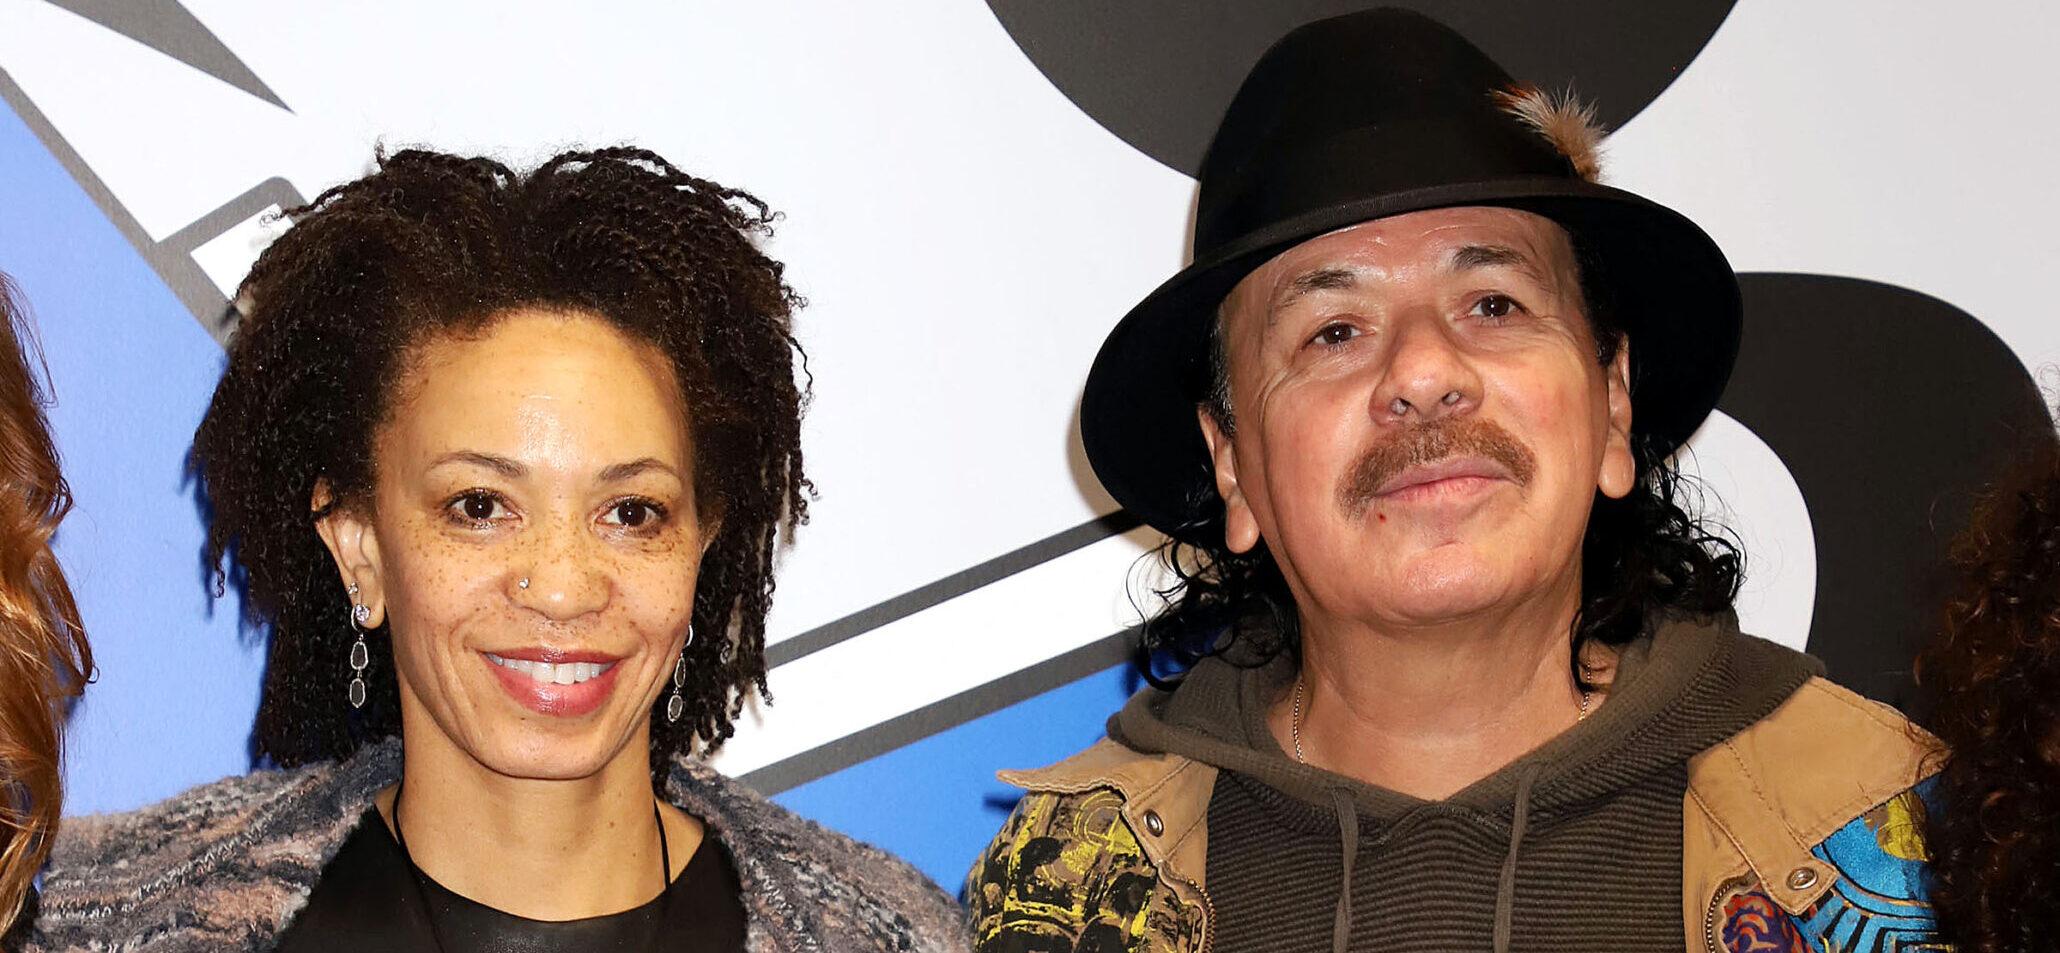 Carlos Santana Gushes About Second Wife Cindy Blackman, Says He Prayed For A ‘Queen’